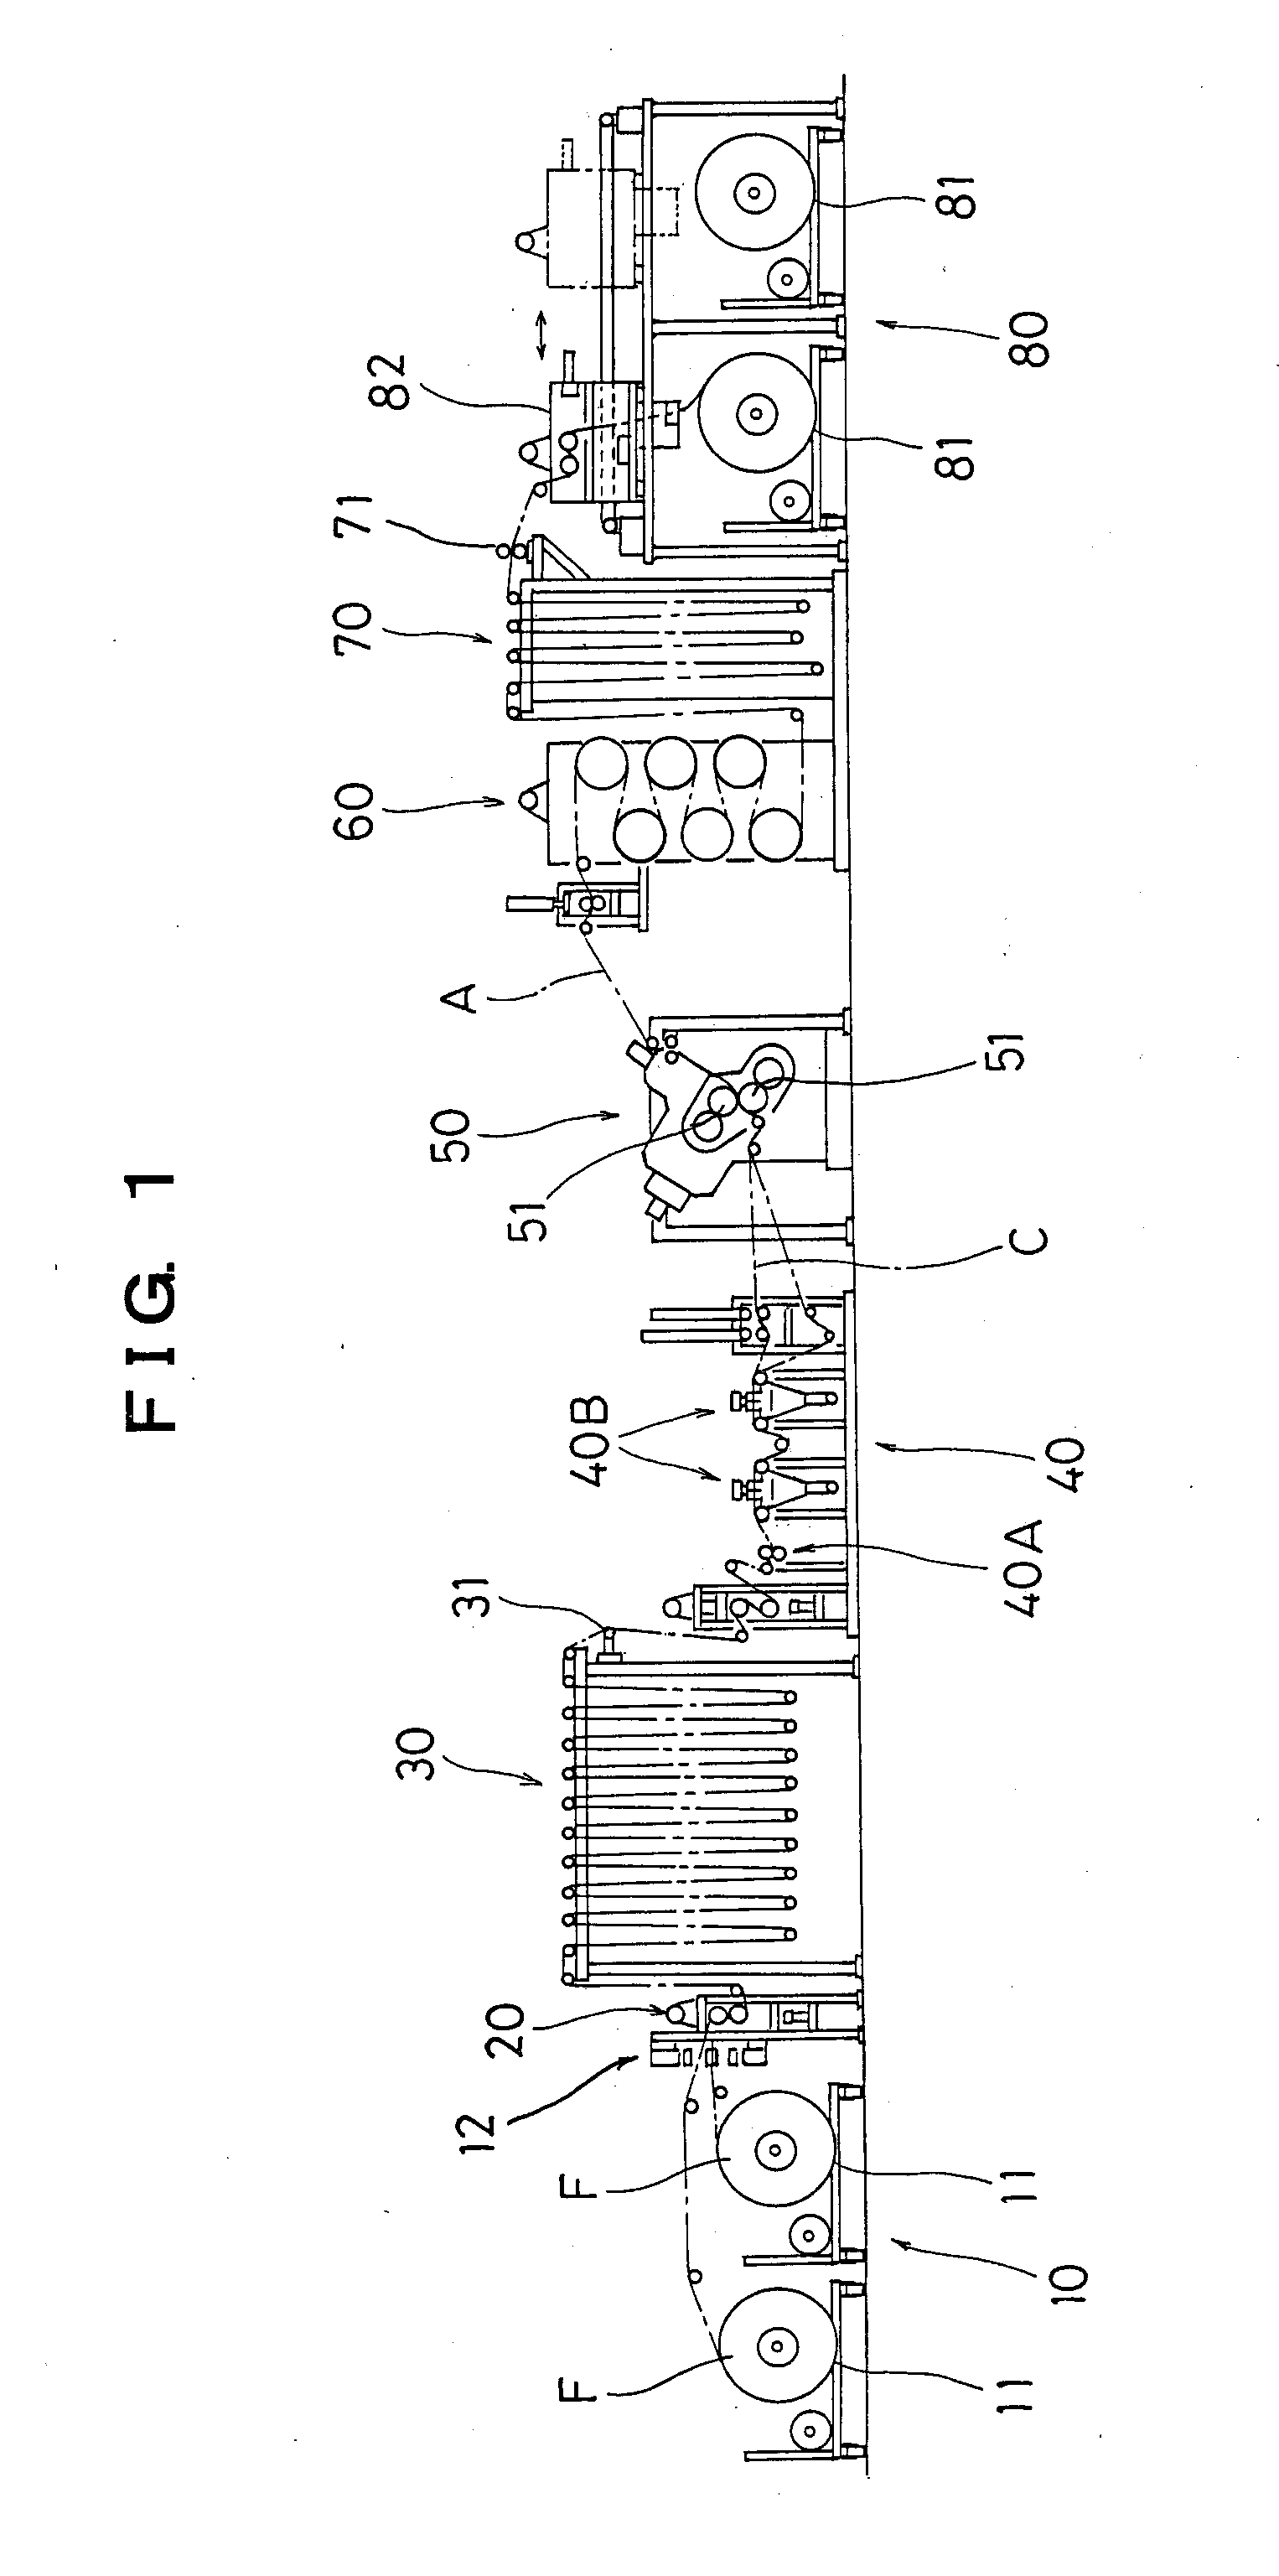 Method and apparatus of removing weft of cord fabric for topping sheet